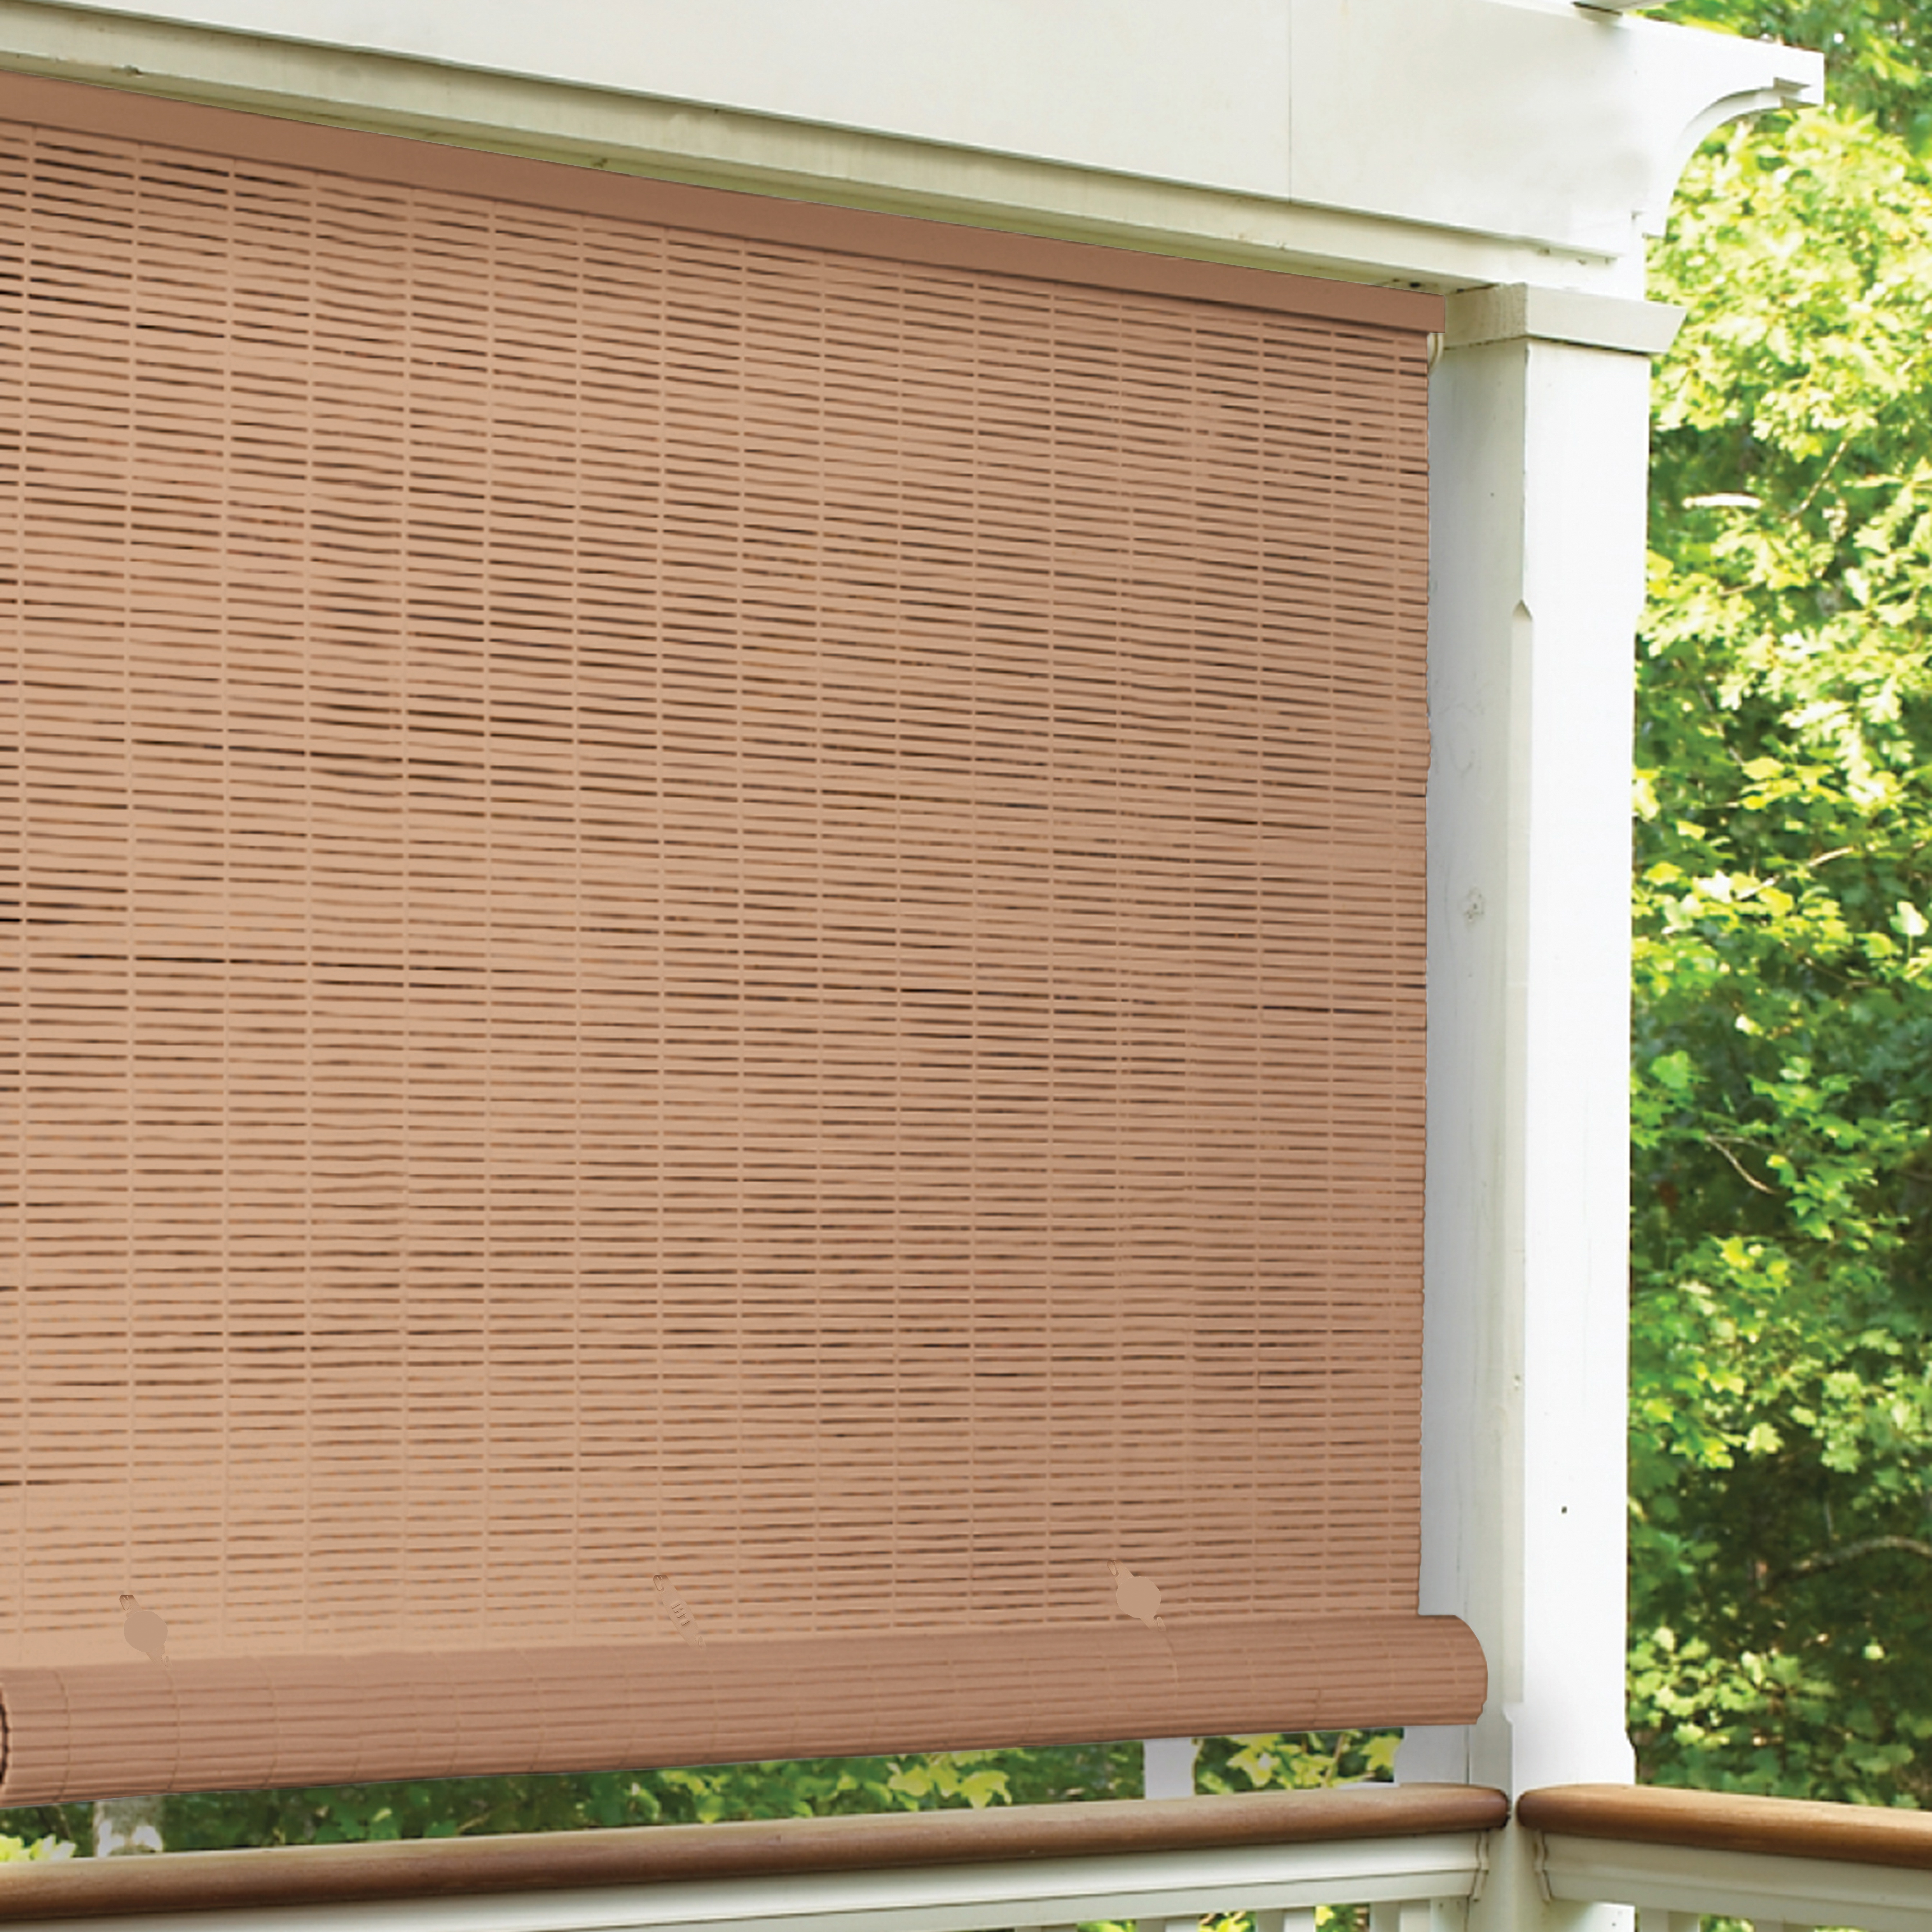 RADIANCE 3321266 Roll-Up Exterior Shade, 72 in L, 72 in W, PVC, Woodgrain - 4